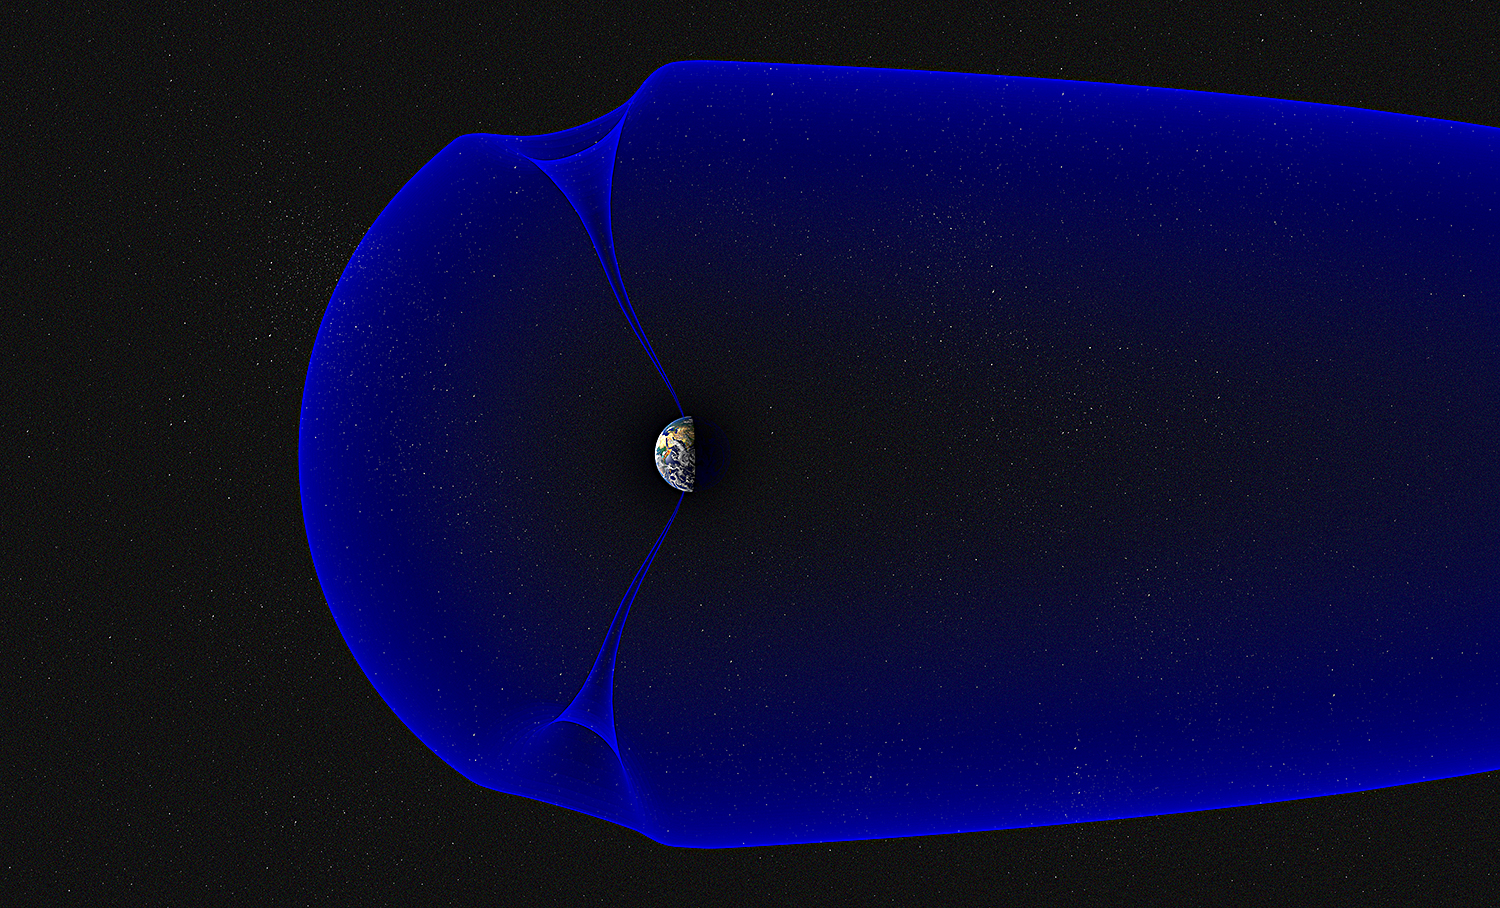 An illustration shows Earth inside of an elongated, tadpole-shaped blue bubble that represents Earth’s magnetosphere. The magnetosphere is short and rounded on the left and has a long tail stretching toward the right. Two thin, funnel-like features within the magnetosphere extend from Earth’s north and south poles toward the top and bottom of the magnetosphere.